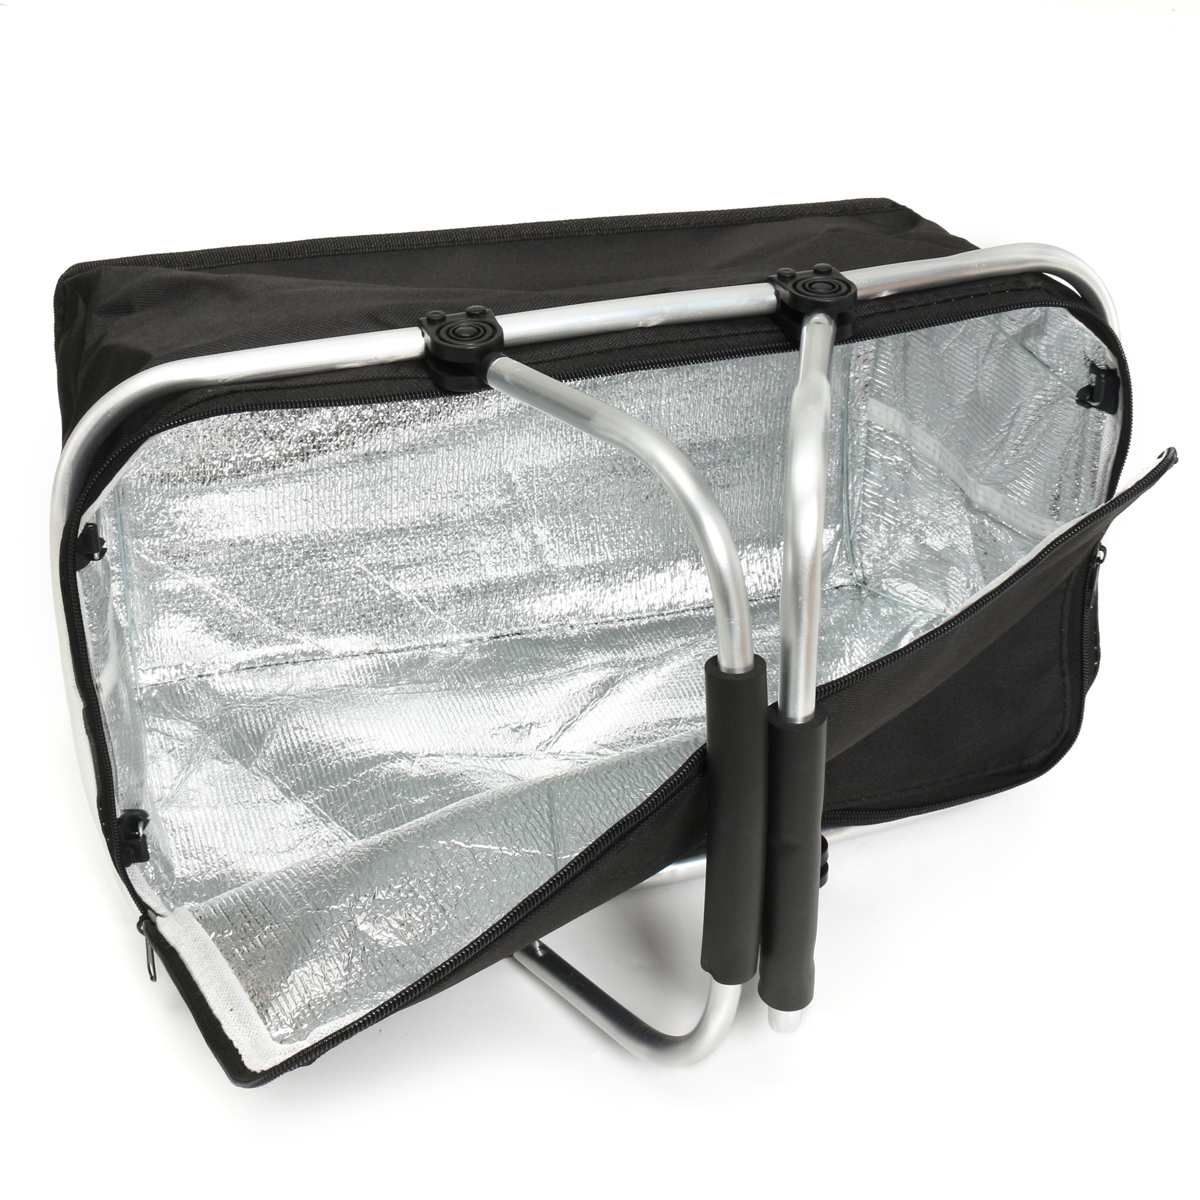 30L Picnic Basket Picnic Bag Insulated Heat Cooler Strong Aluminum Frame Waterproof Lining and Collapsible For Camping Picnic